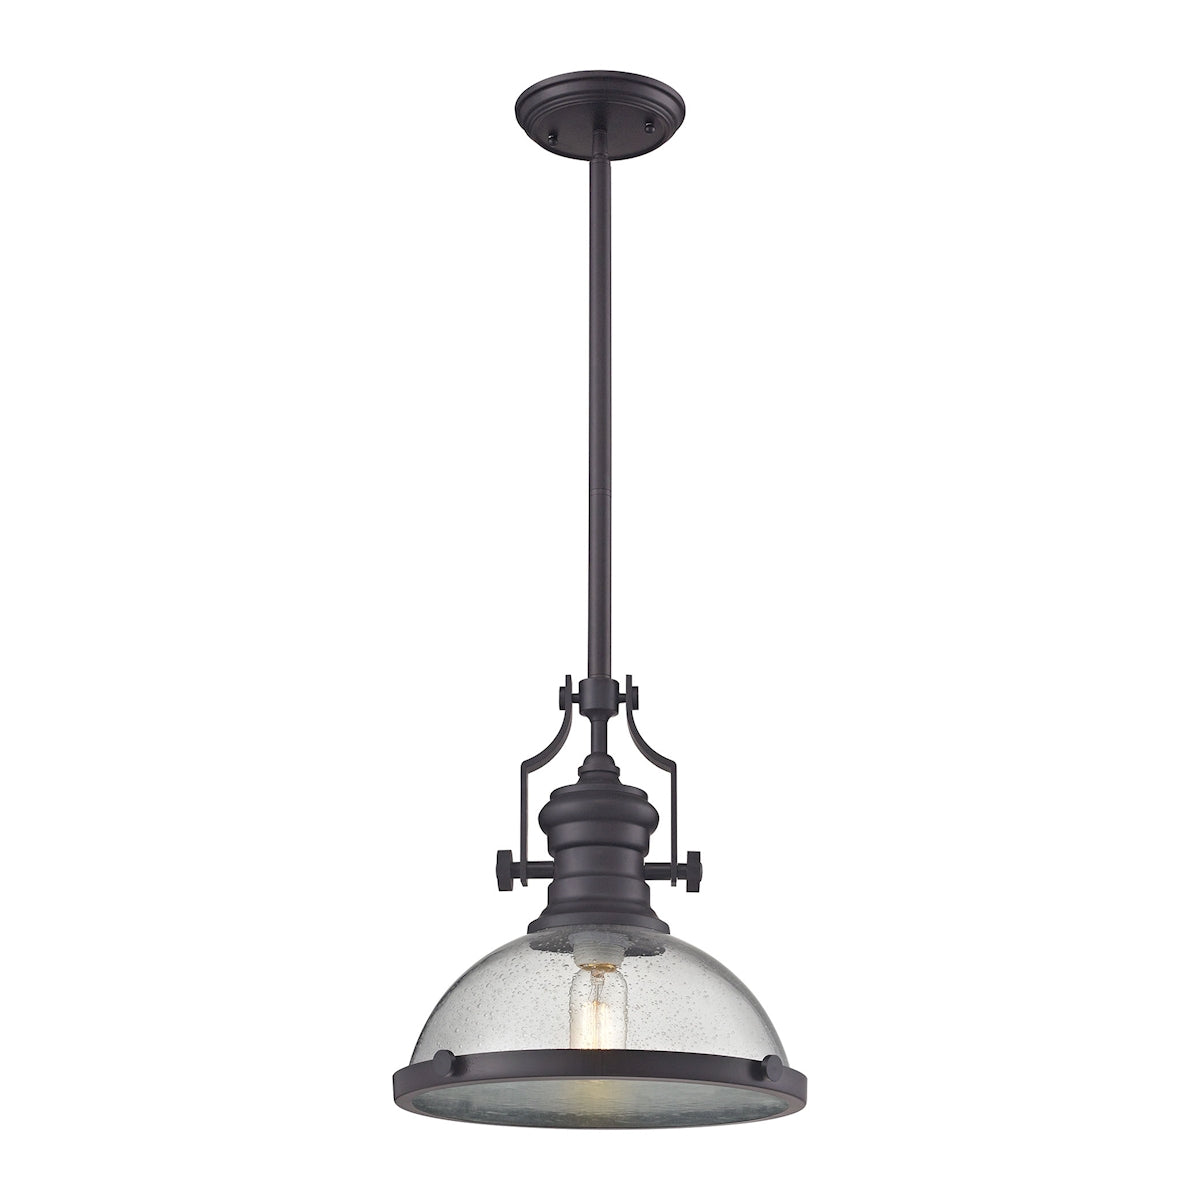 ELK Lighting 67733-1 Chadwick 1-Light Pendant in Oil Rubbed Bronze with Seedy Glass